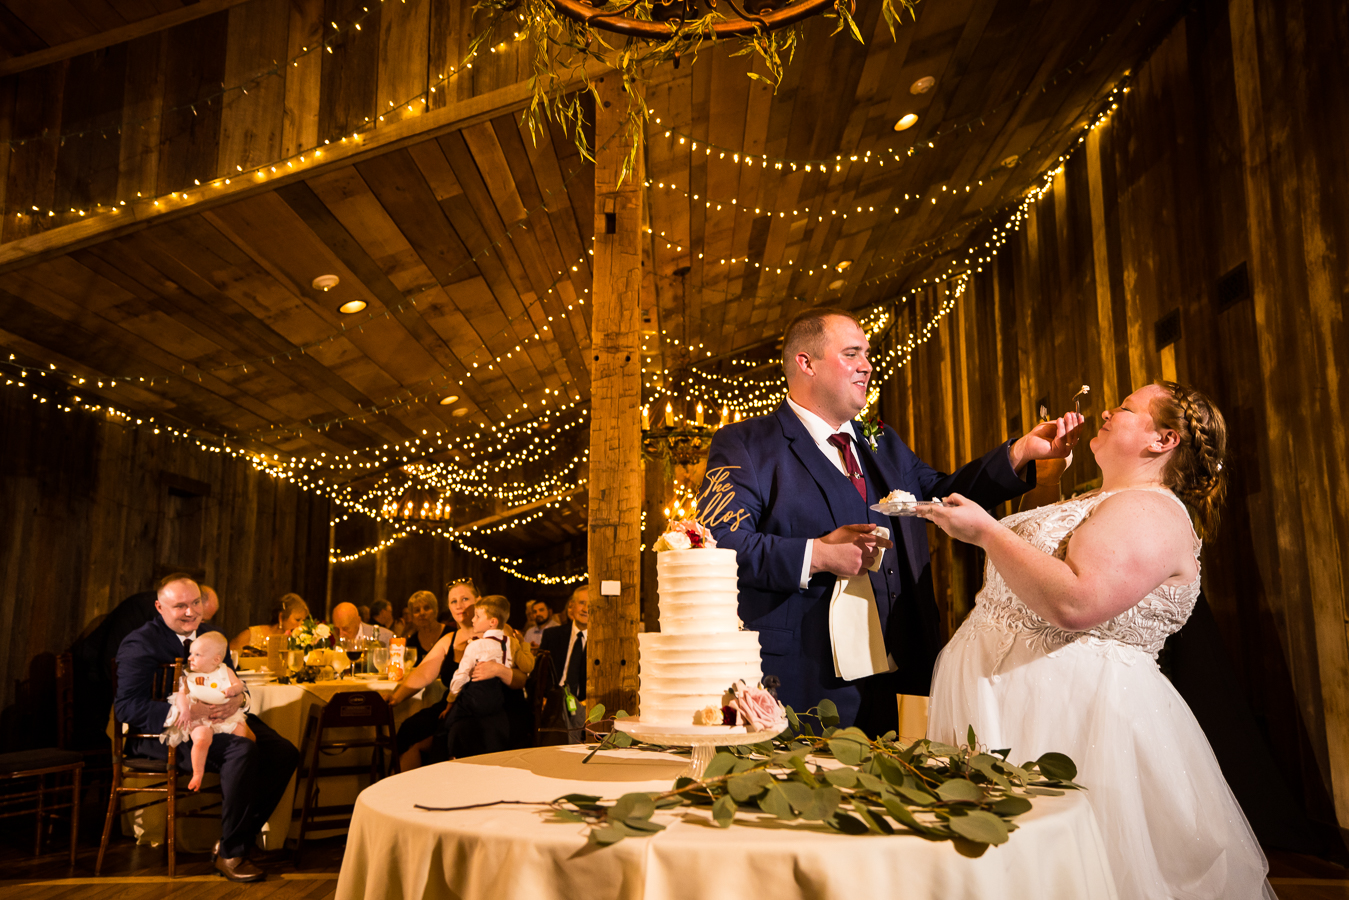 barn wedding photographer, lisa rhinehart, captures this fun image of the groom feeding the bride some cake during their wedding reception with the gorgeous barn behind them decorated in the twinkle lights and greenery